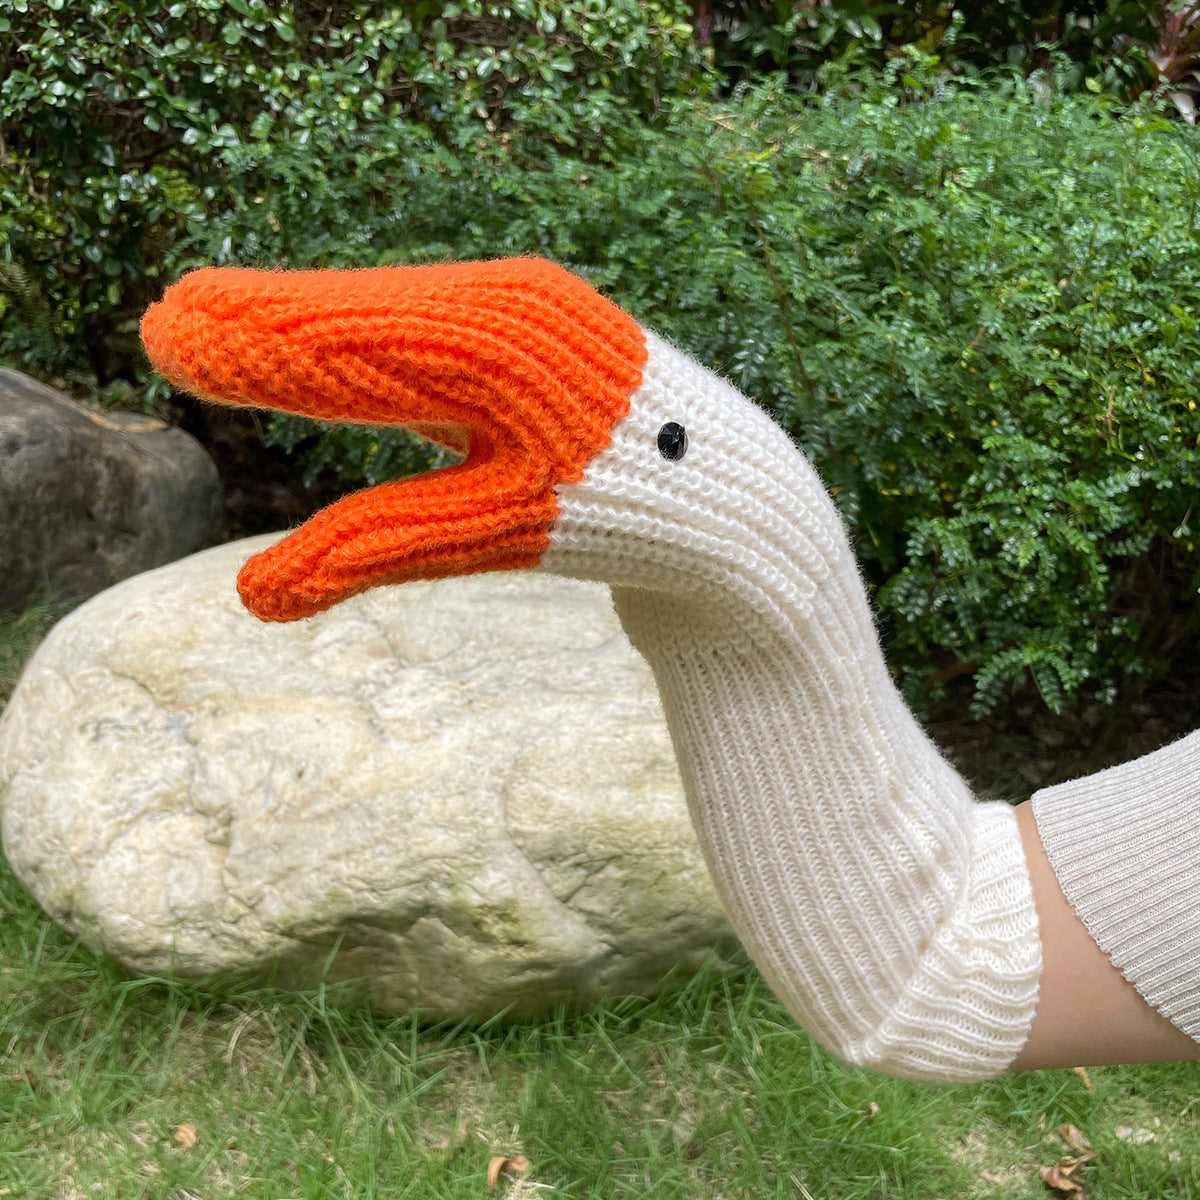 Unisex Knitted Wool Mittens Cold-proof